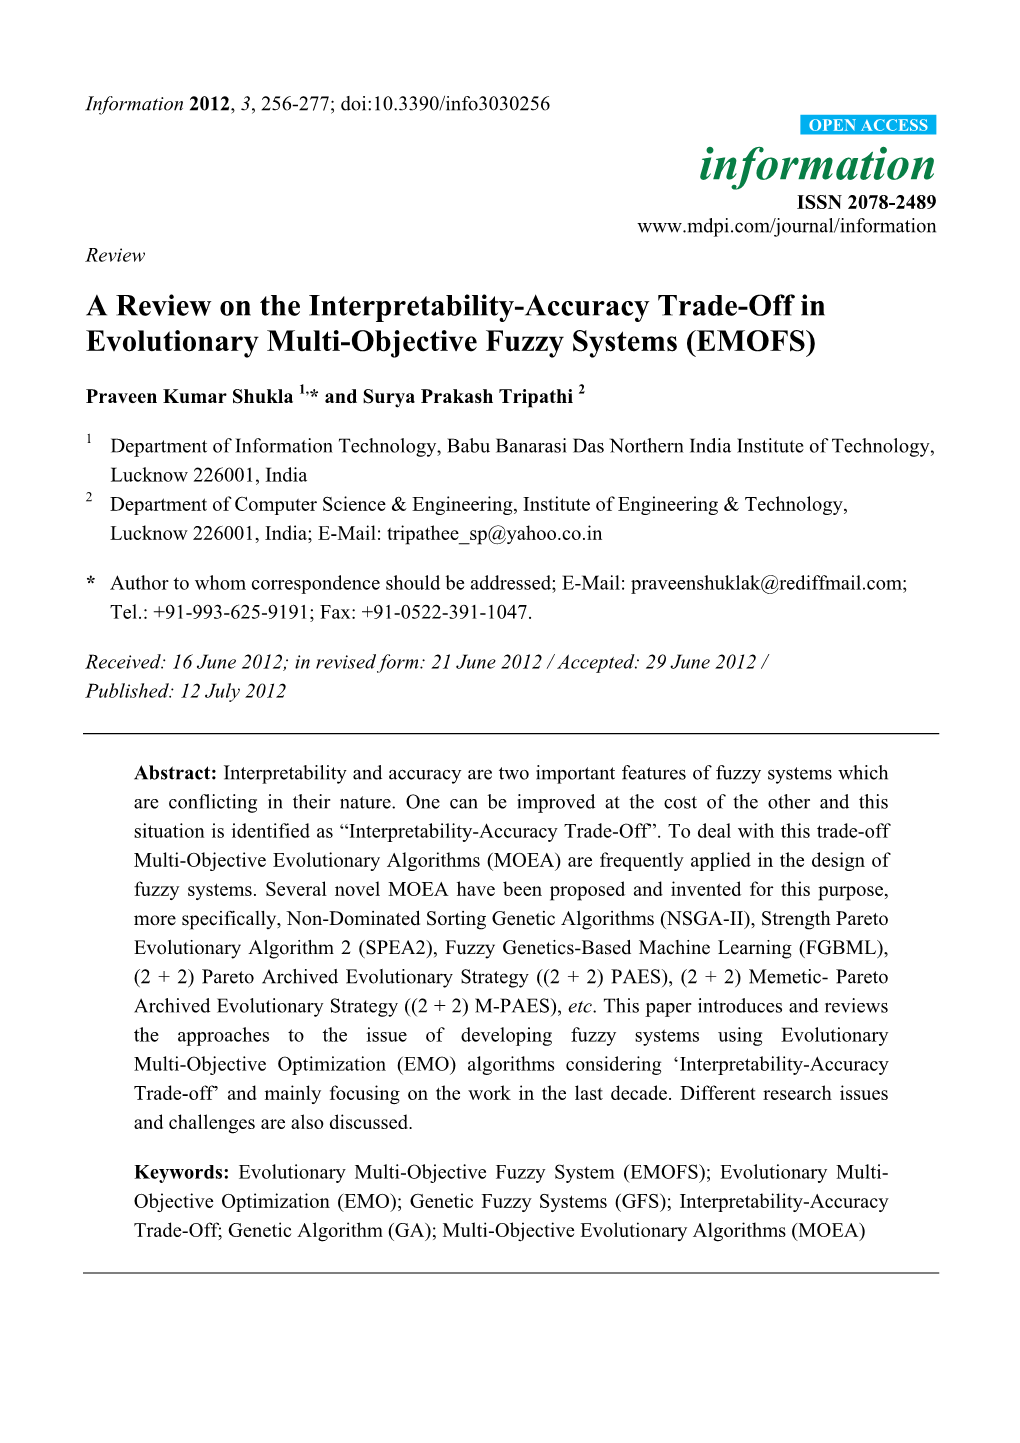 A Review on the Interpretability-Accuracy Trade-Off in Evolutionary Multi-Objective Fuzzy Systems (EMOFS)